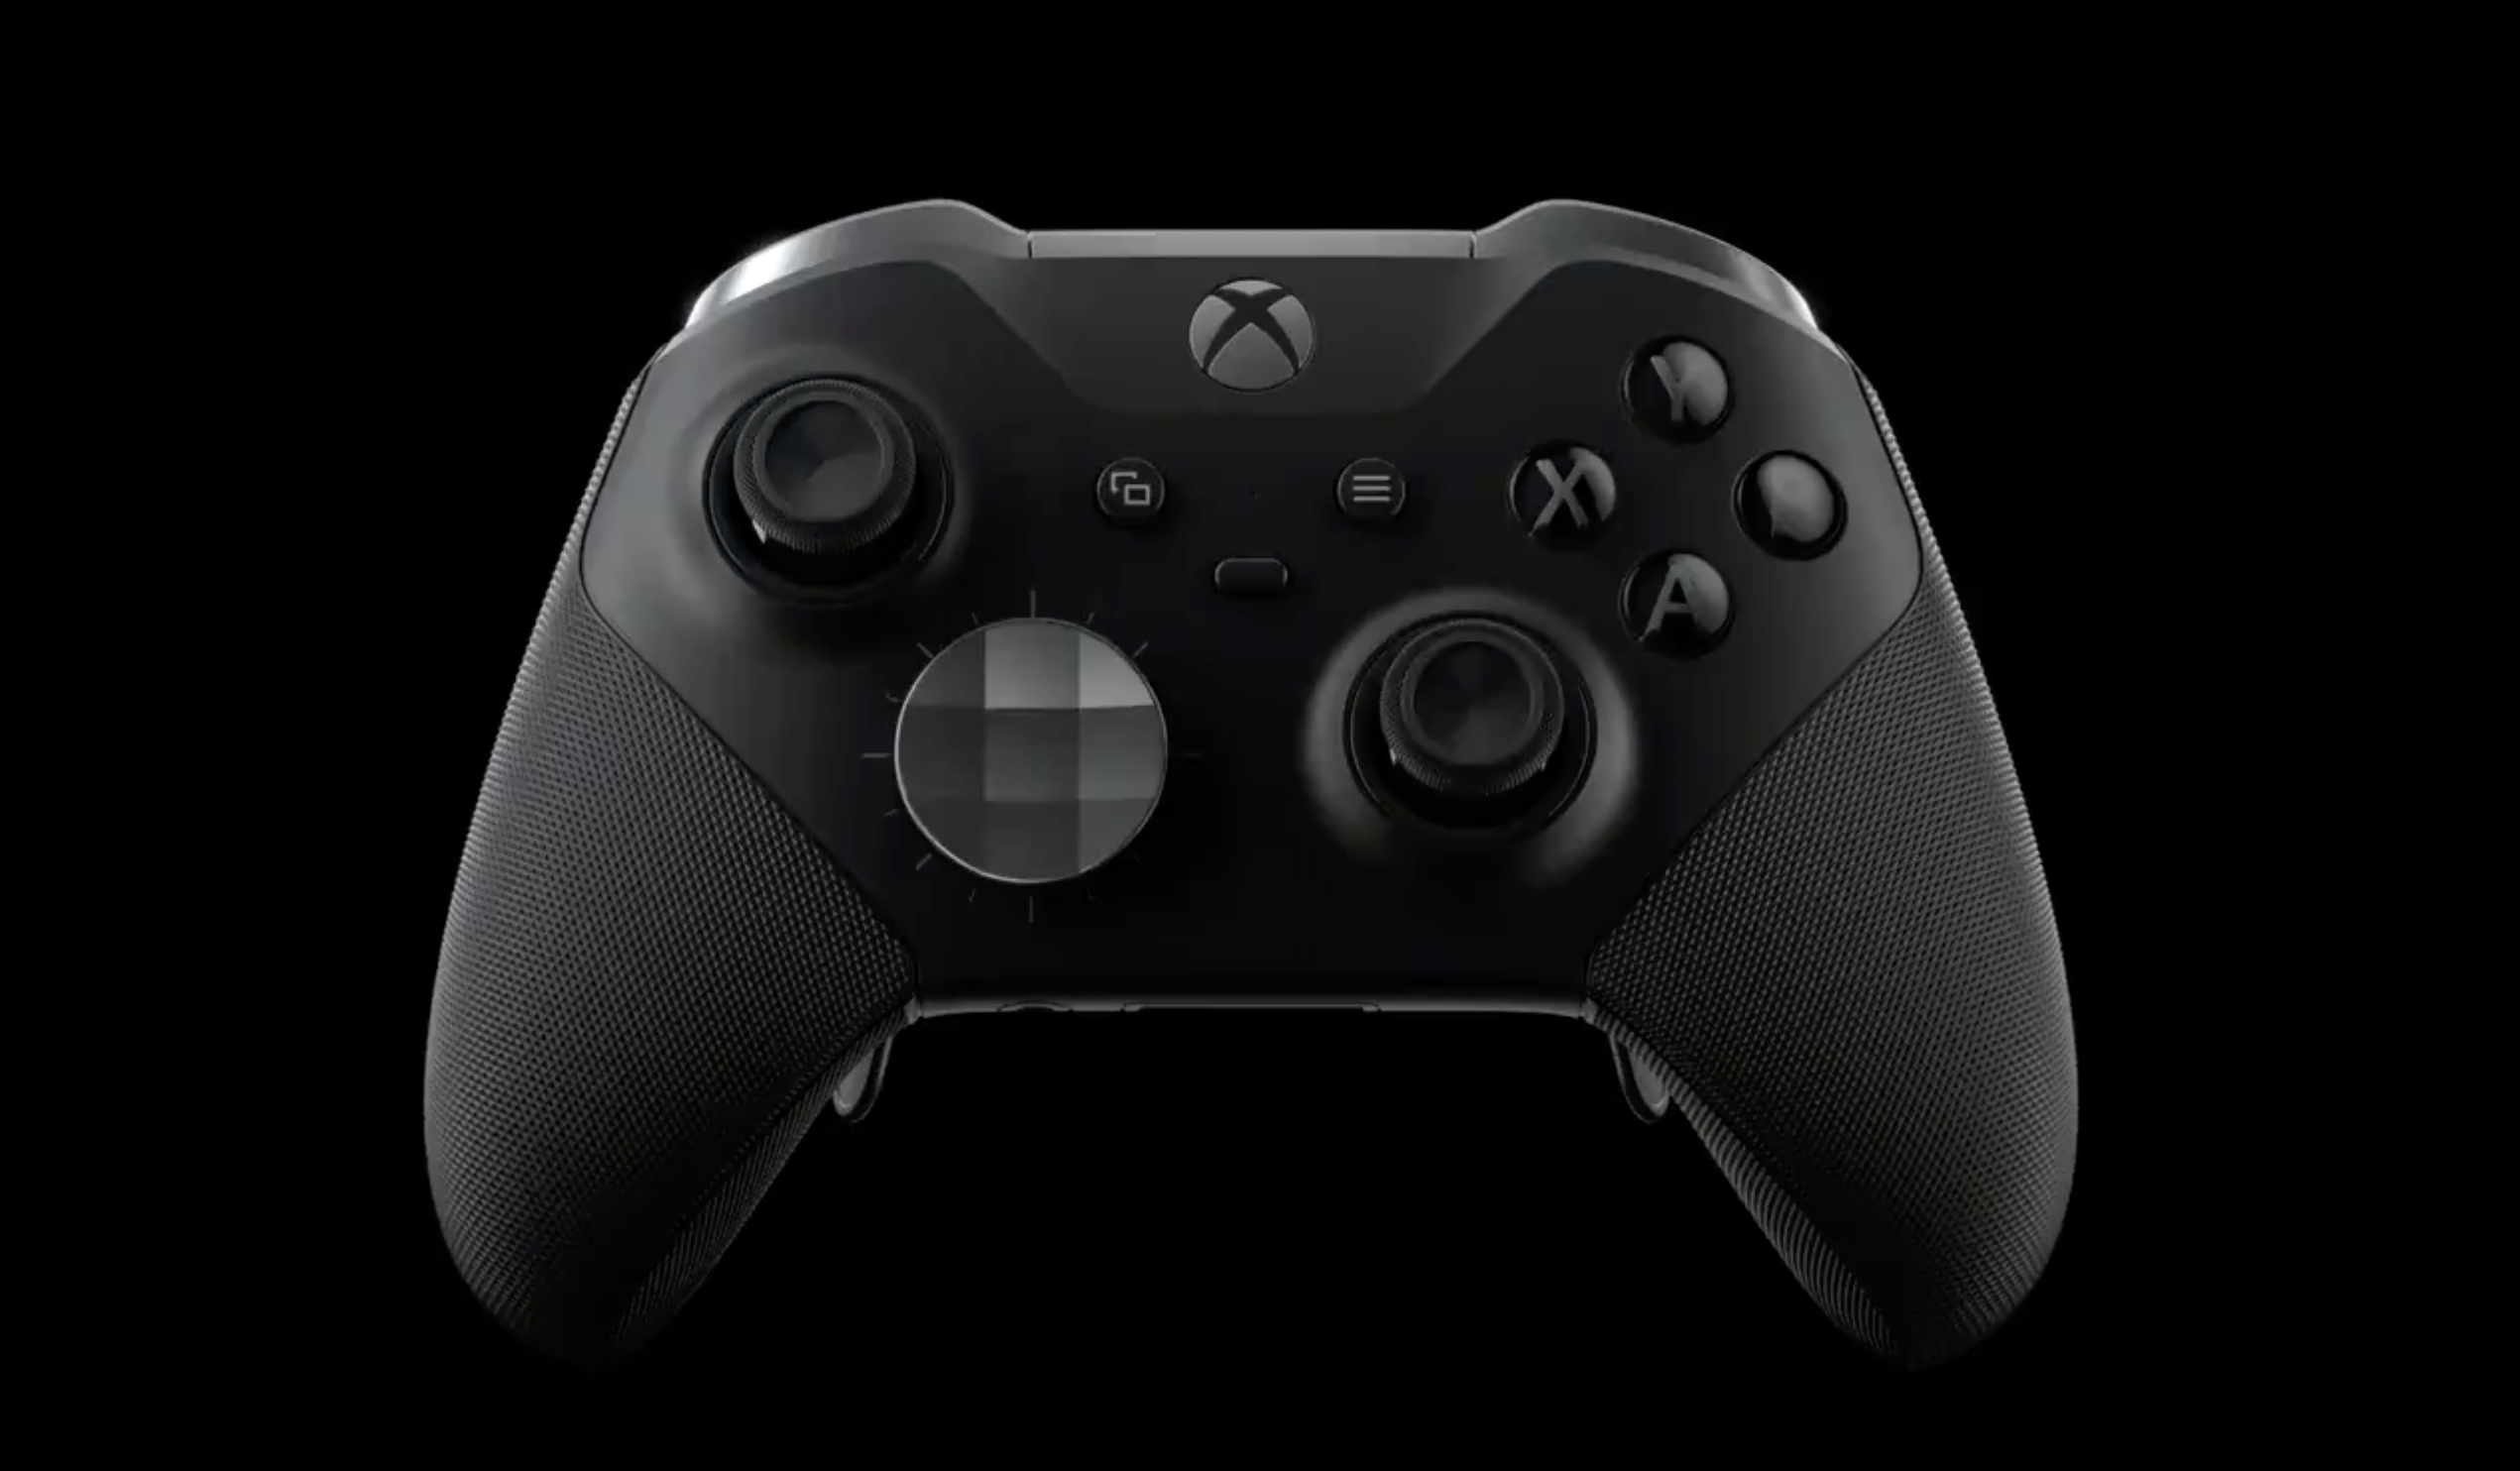 will xbox one controllers work on scarlett